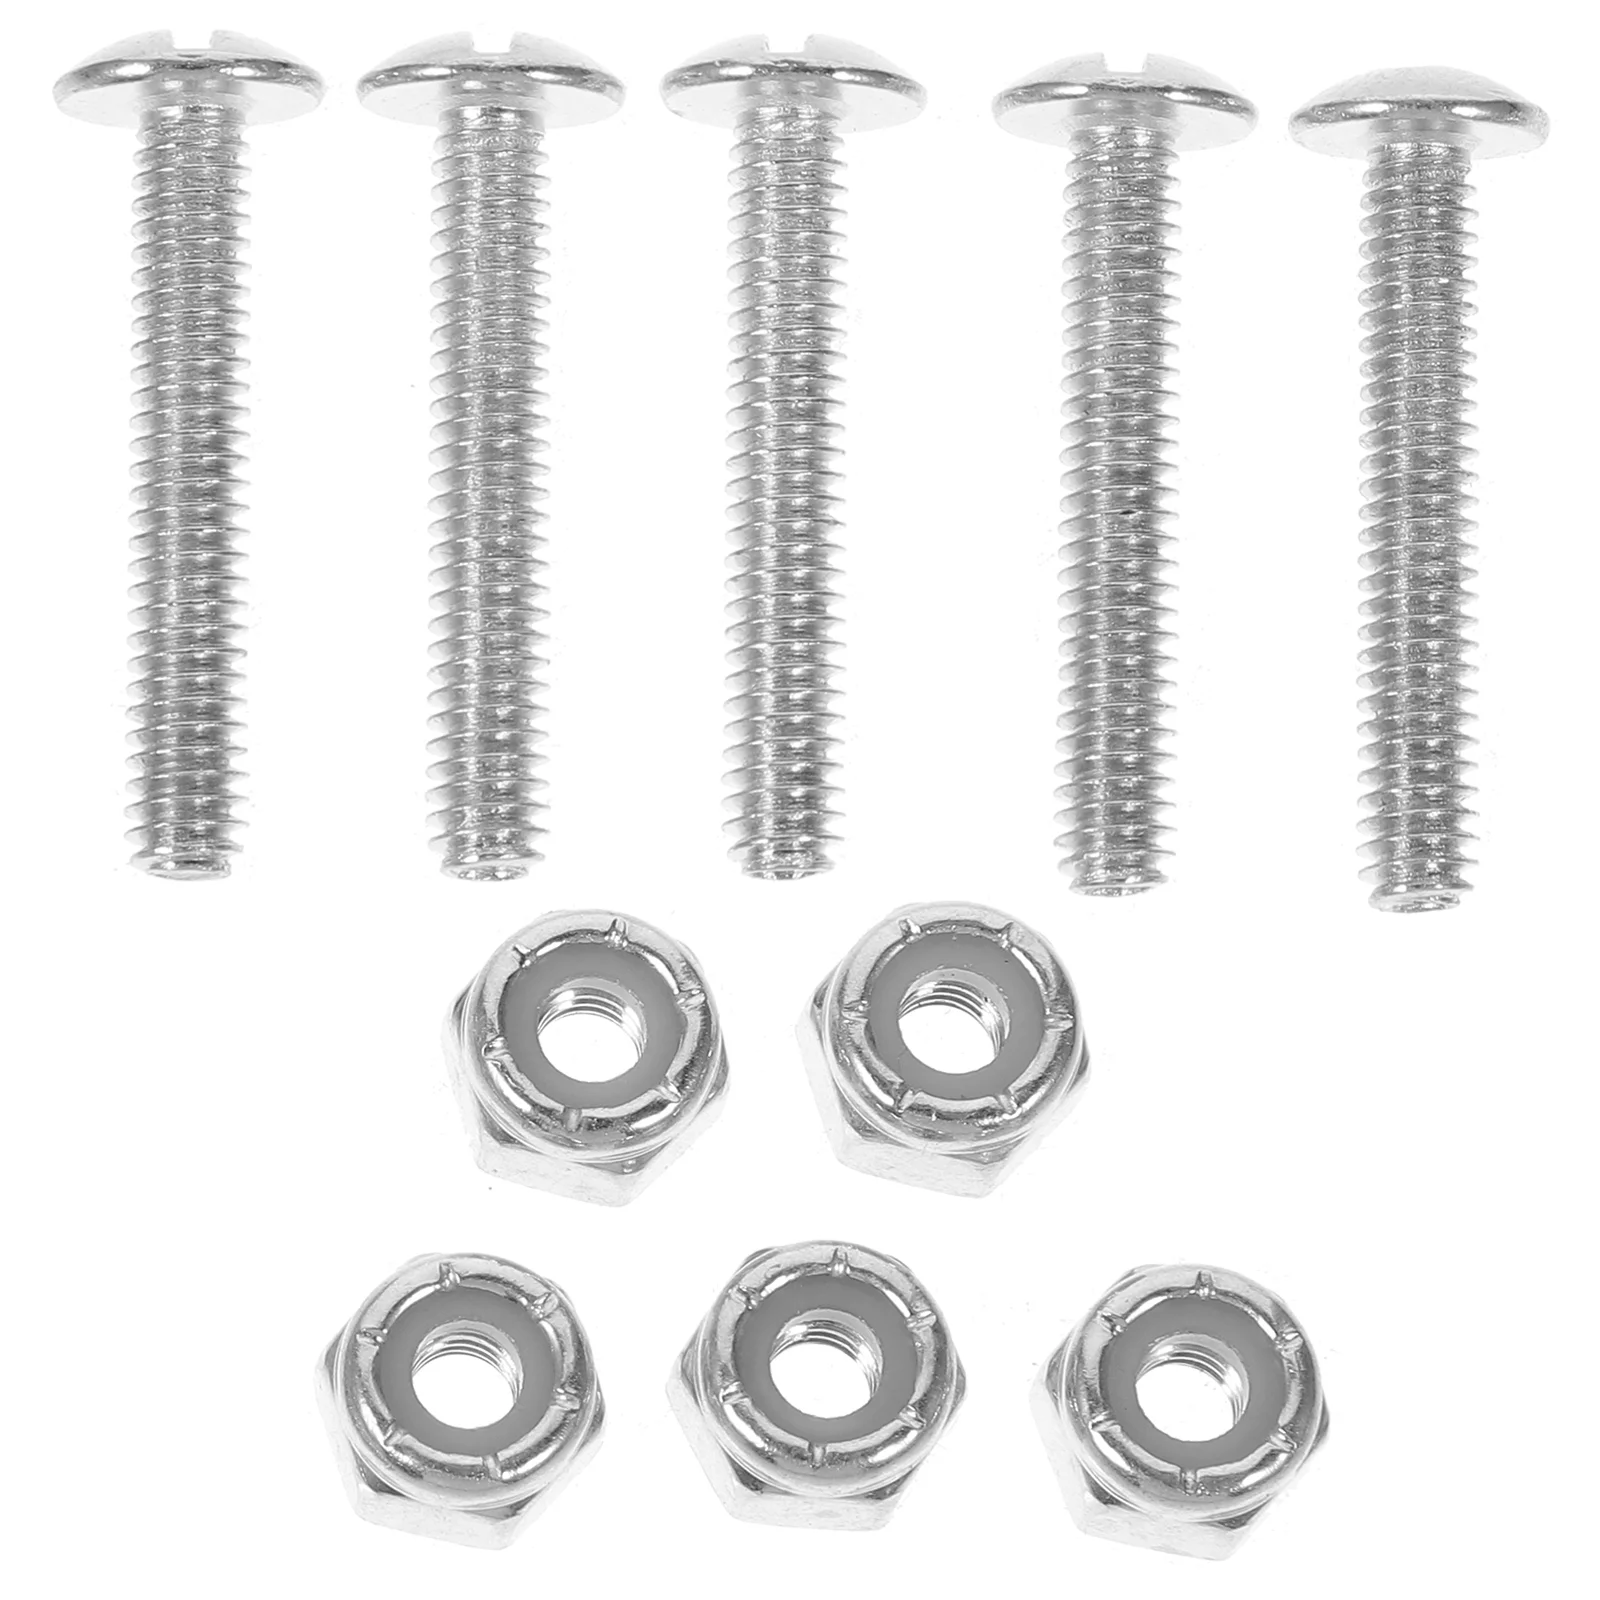 12 Pcs Table Football Screws Foosball Replacement Parts Nut Soccer Hardware Machine Nuts Galvanized Iron Accessories metal clip corner screws edge protector buckles for leather craft handbags purse end hook screw decorstion hardware accessories